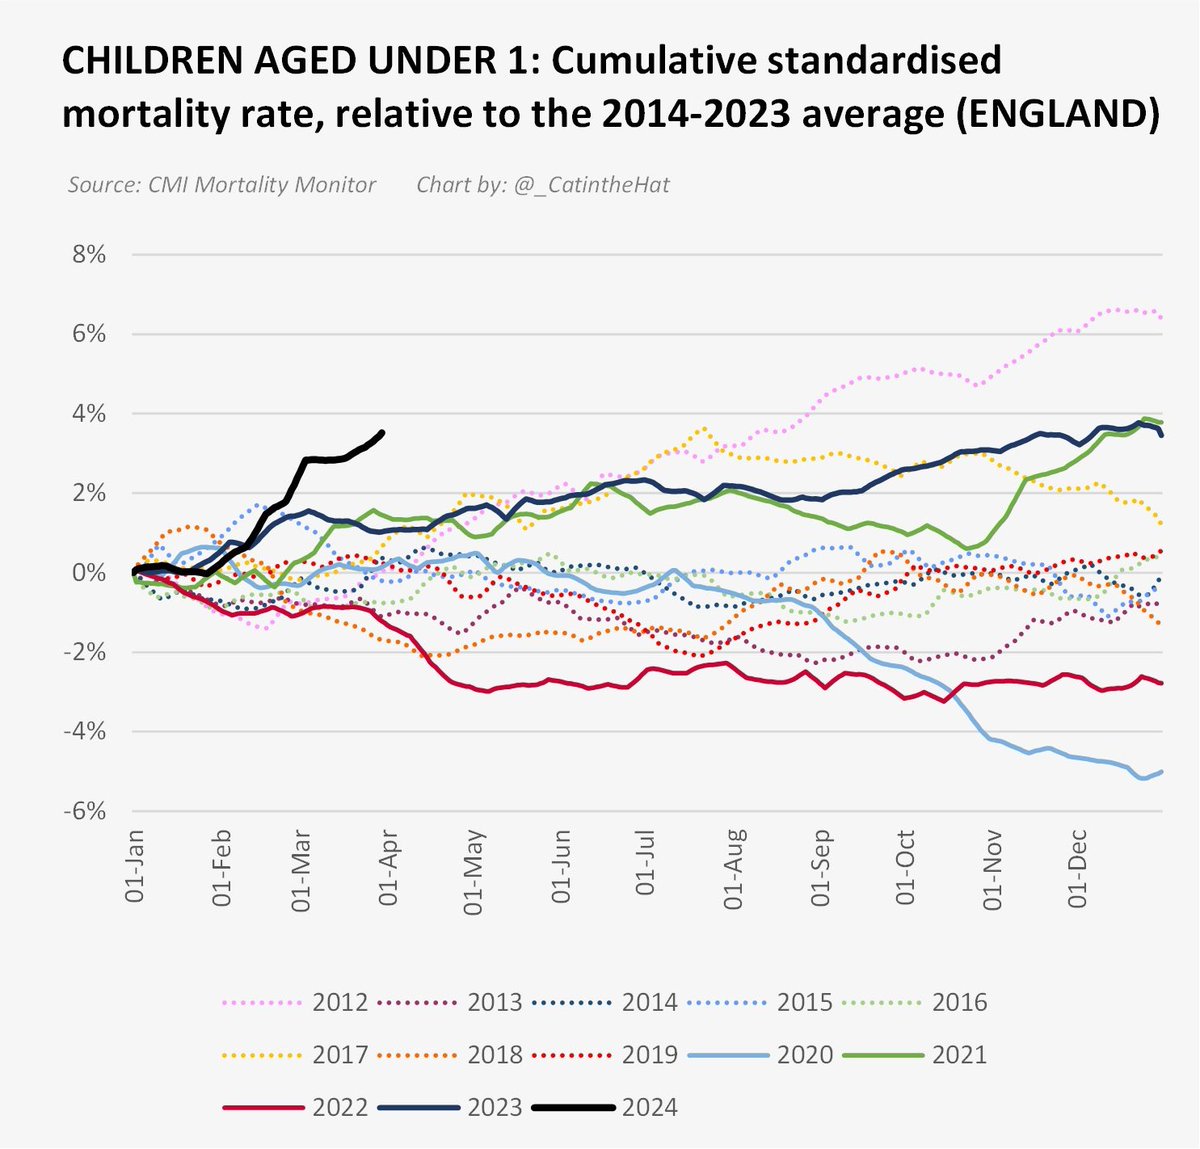 Let’s take a closer look at the data for babies under 1 year old. As of the end of March 2024, the cumulative standardised mortality rate was already 3.5% higher than the average from 2014-23. In fact, it’s considerably higher than any other year going back as far as 2012. /3